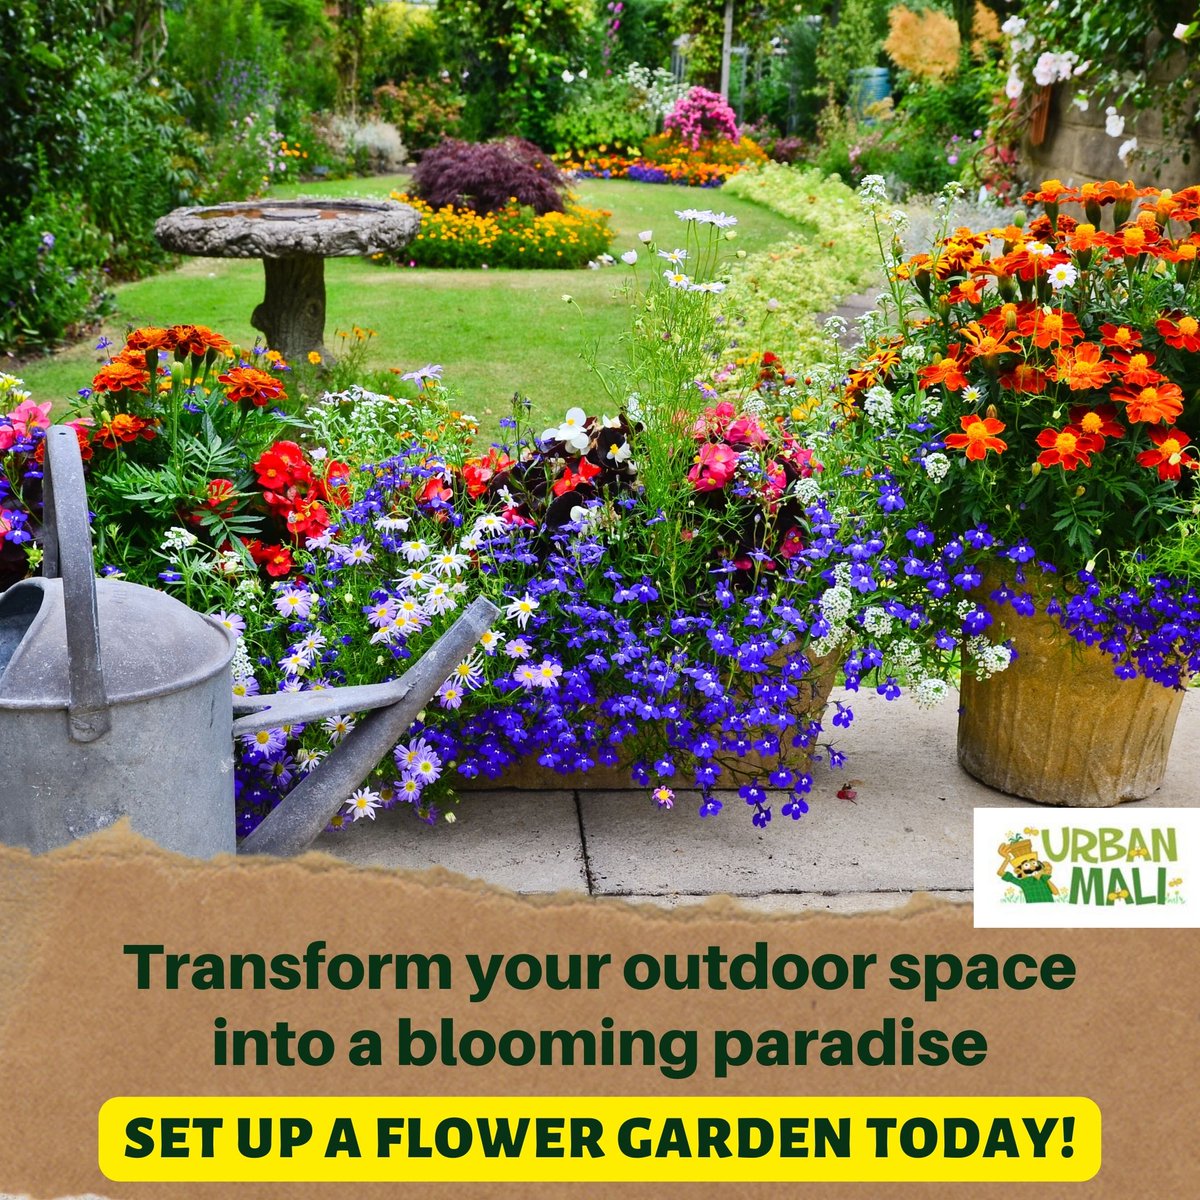 Escape to a blooming paradise right in your backyard. Let nature's colors and fragrances surround you as you transform your outdoor space into a floral wonderland.

#Gardendesign #Flowergarden #GreenThumbsUp #plantaddict #plantlife #urbangardening #homegardening #urbanmali